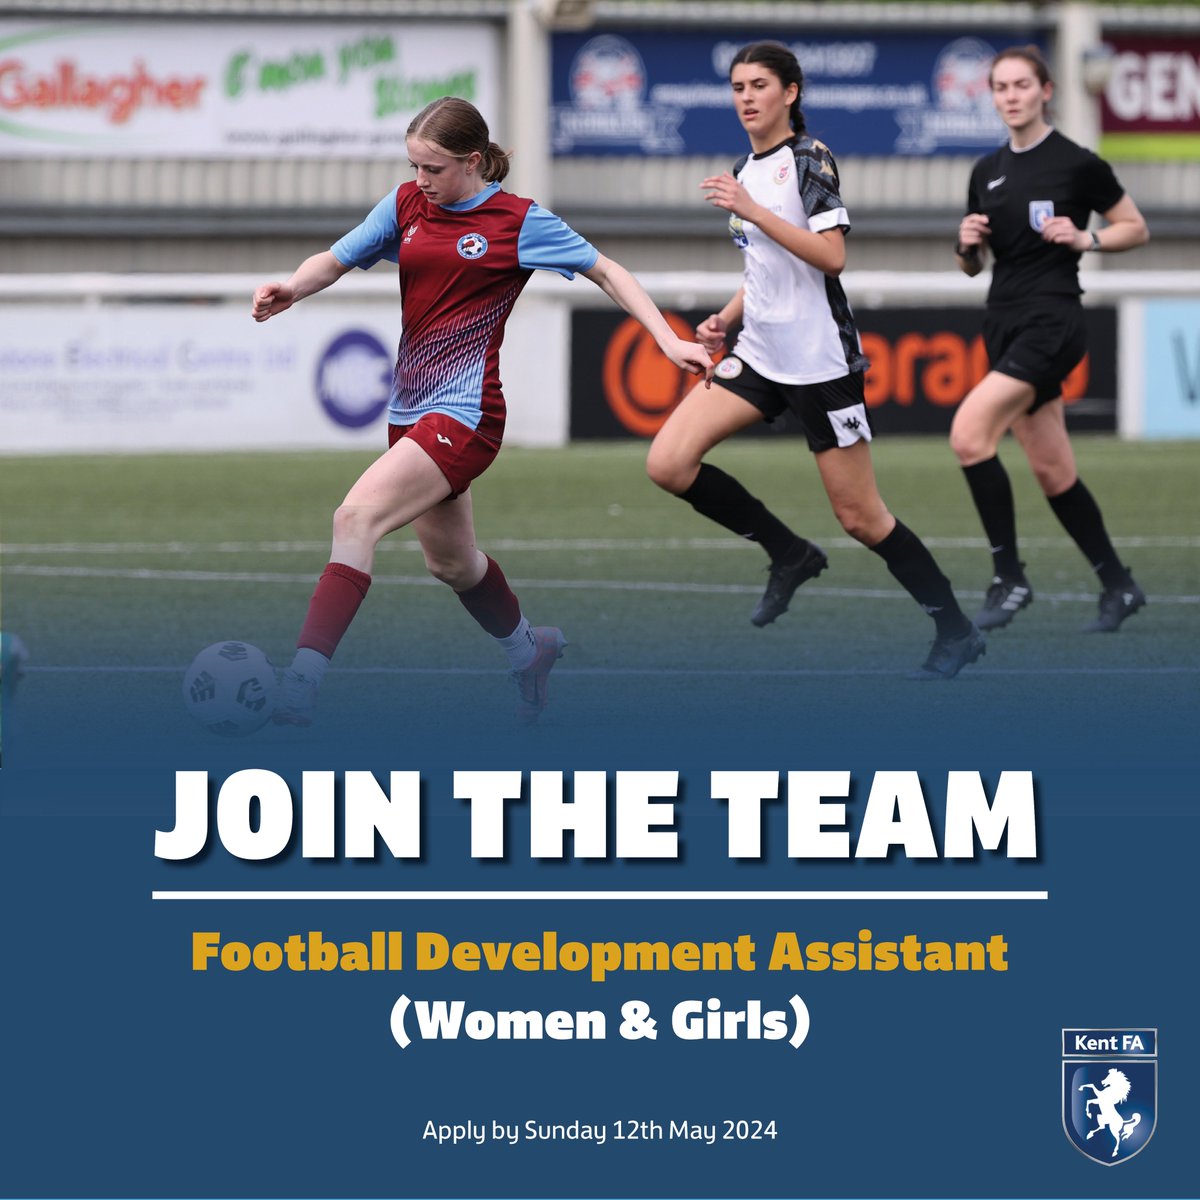 JOIN THE TEAM⚽️| We are looking to recruit a dynamic and inspiring football development assistant, women & girls [FDA] to join our team! Check out the job description and application form here⬇️ bit.ly/49GynTk 🗓️Closing date for applications: 12 May 2024